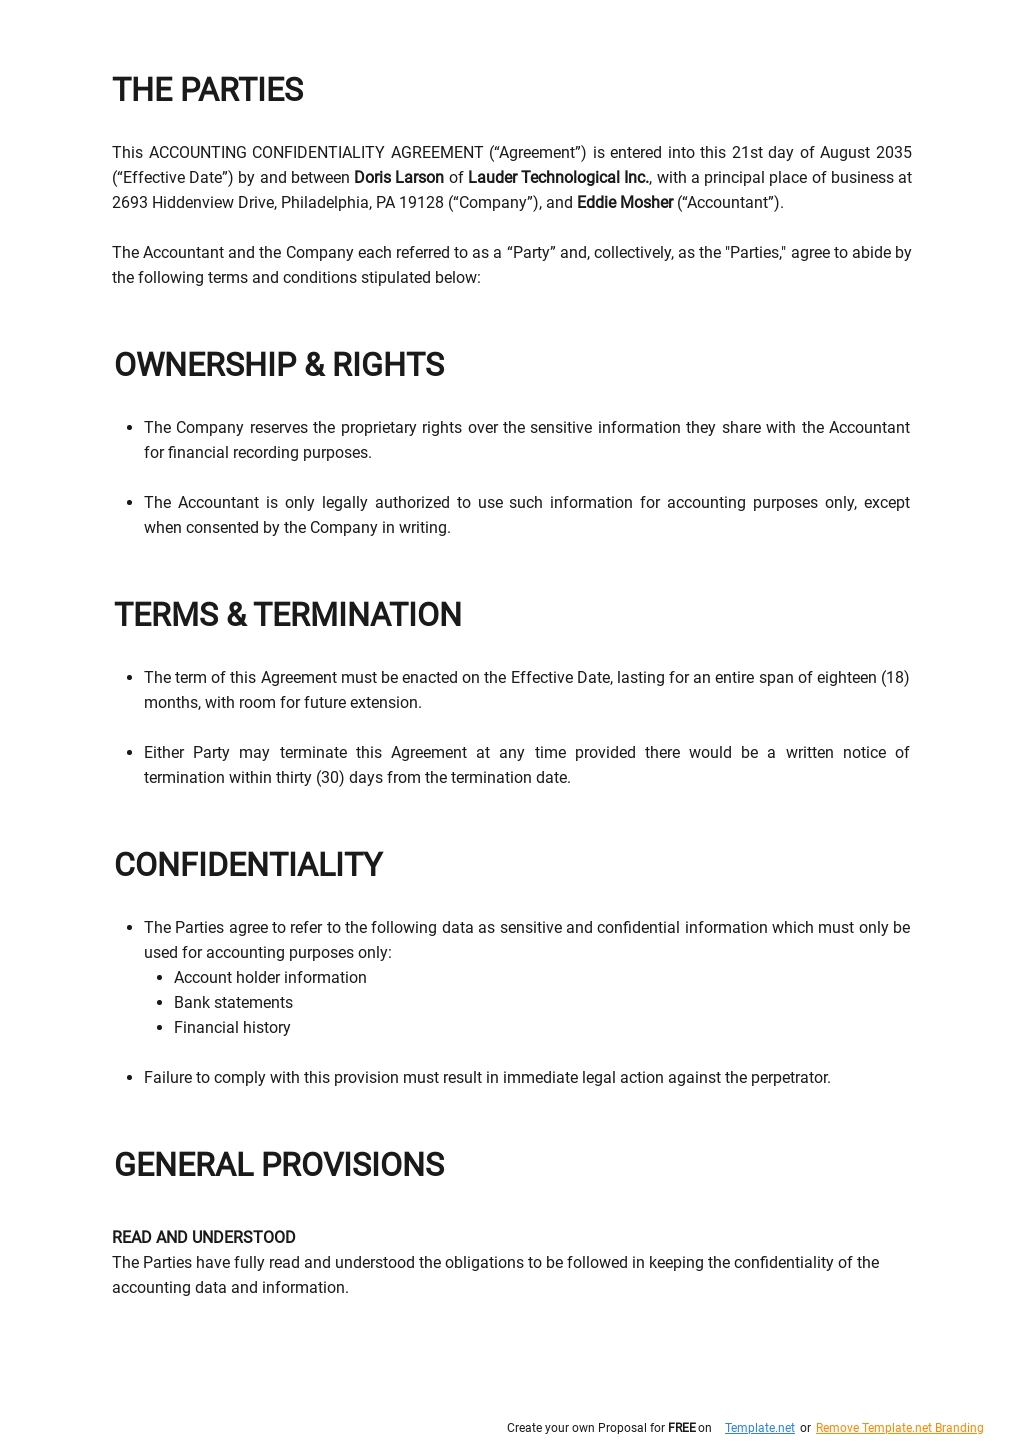 Sample Accounting Confidentiality Agreement Template 1.jpe